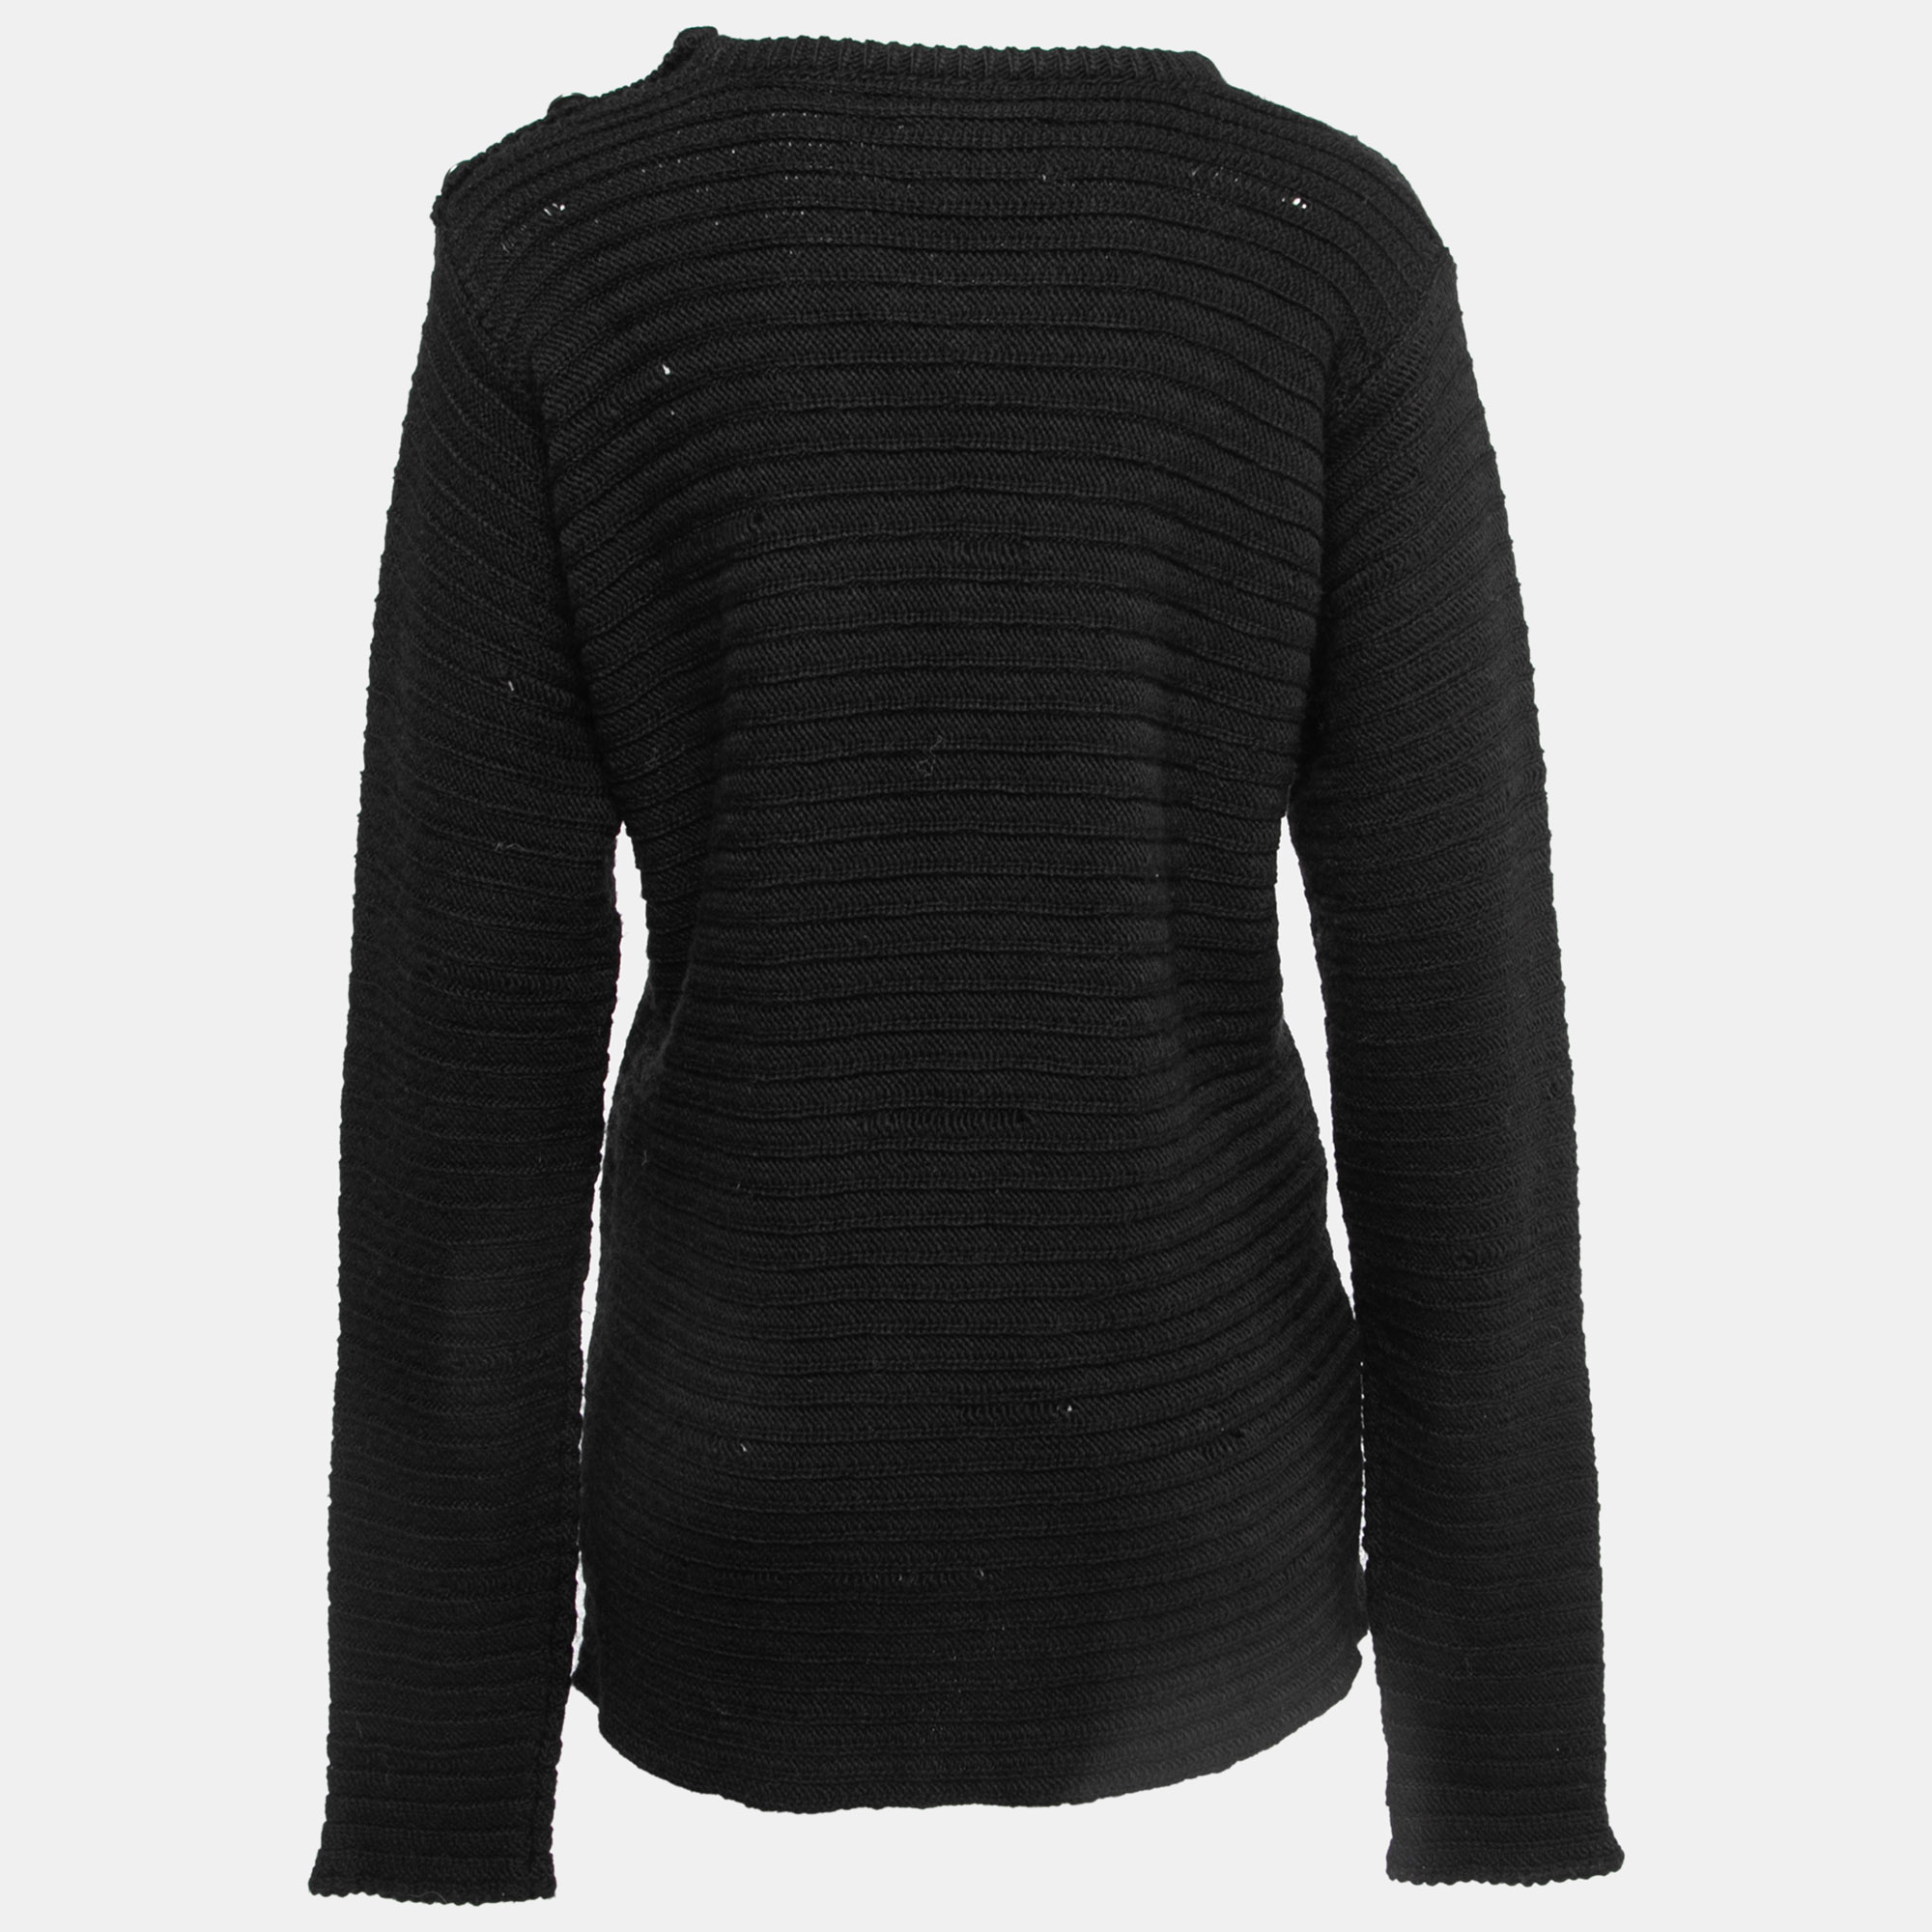 

Zadig & Voltaire Black Wool & Acrylic Button Detail Sweater